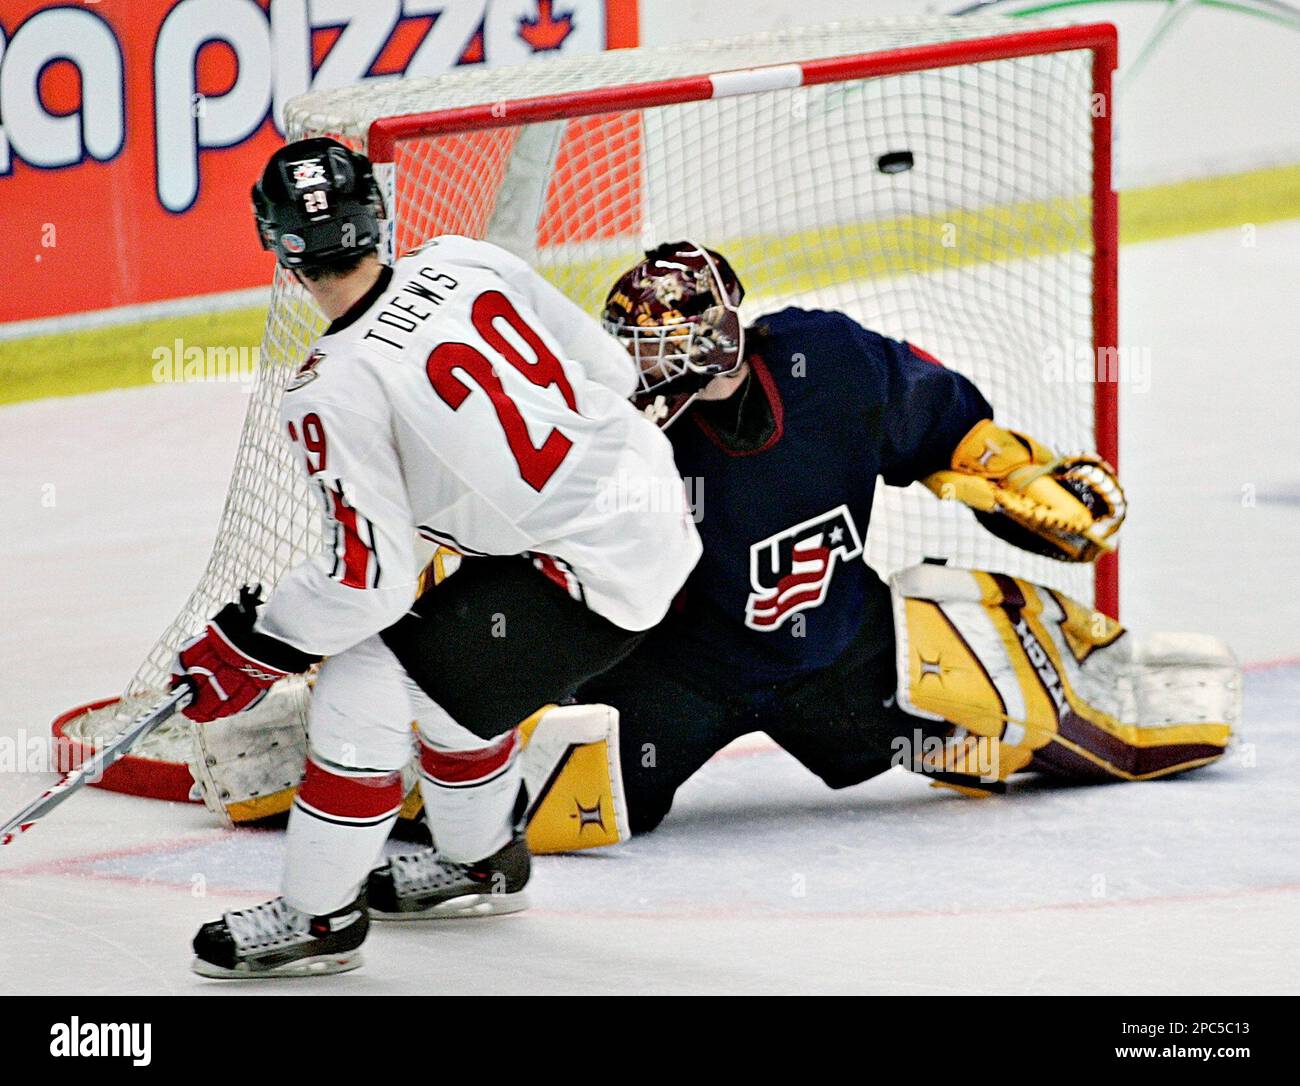 Team Canadas Jonathan Toews (29) scores the winning goal in a shootout against team USA goalie Jeff Frazee during semi-final game action at the World U20 hockey championship Wednesday, Jan